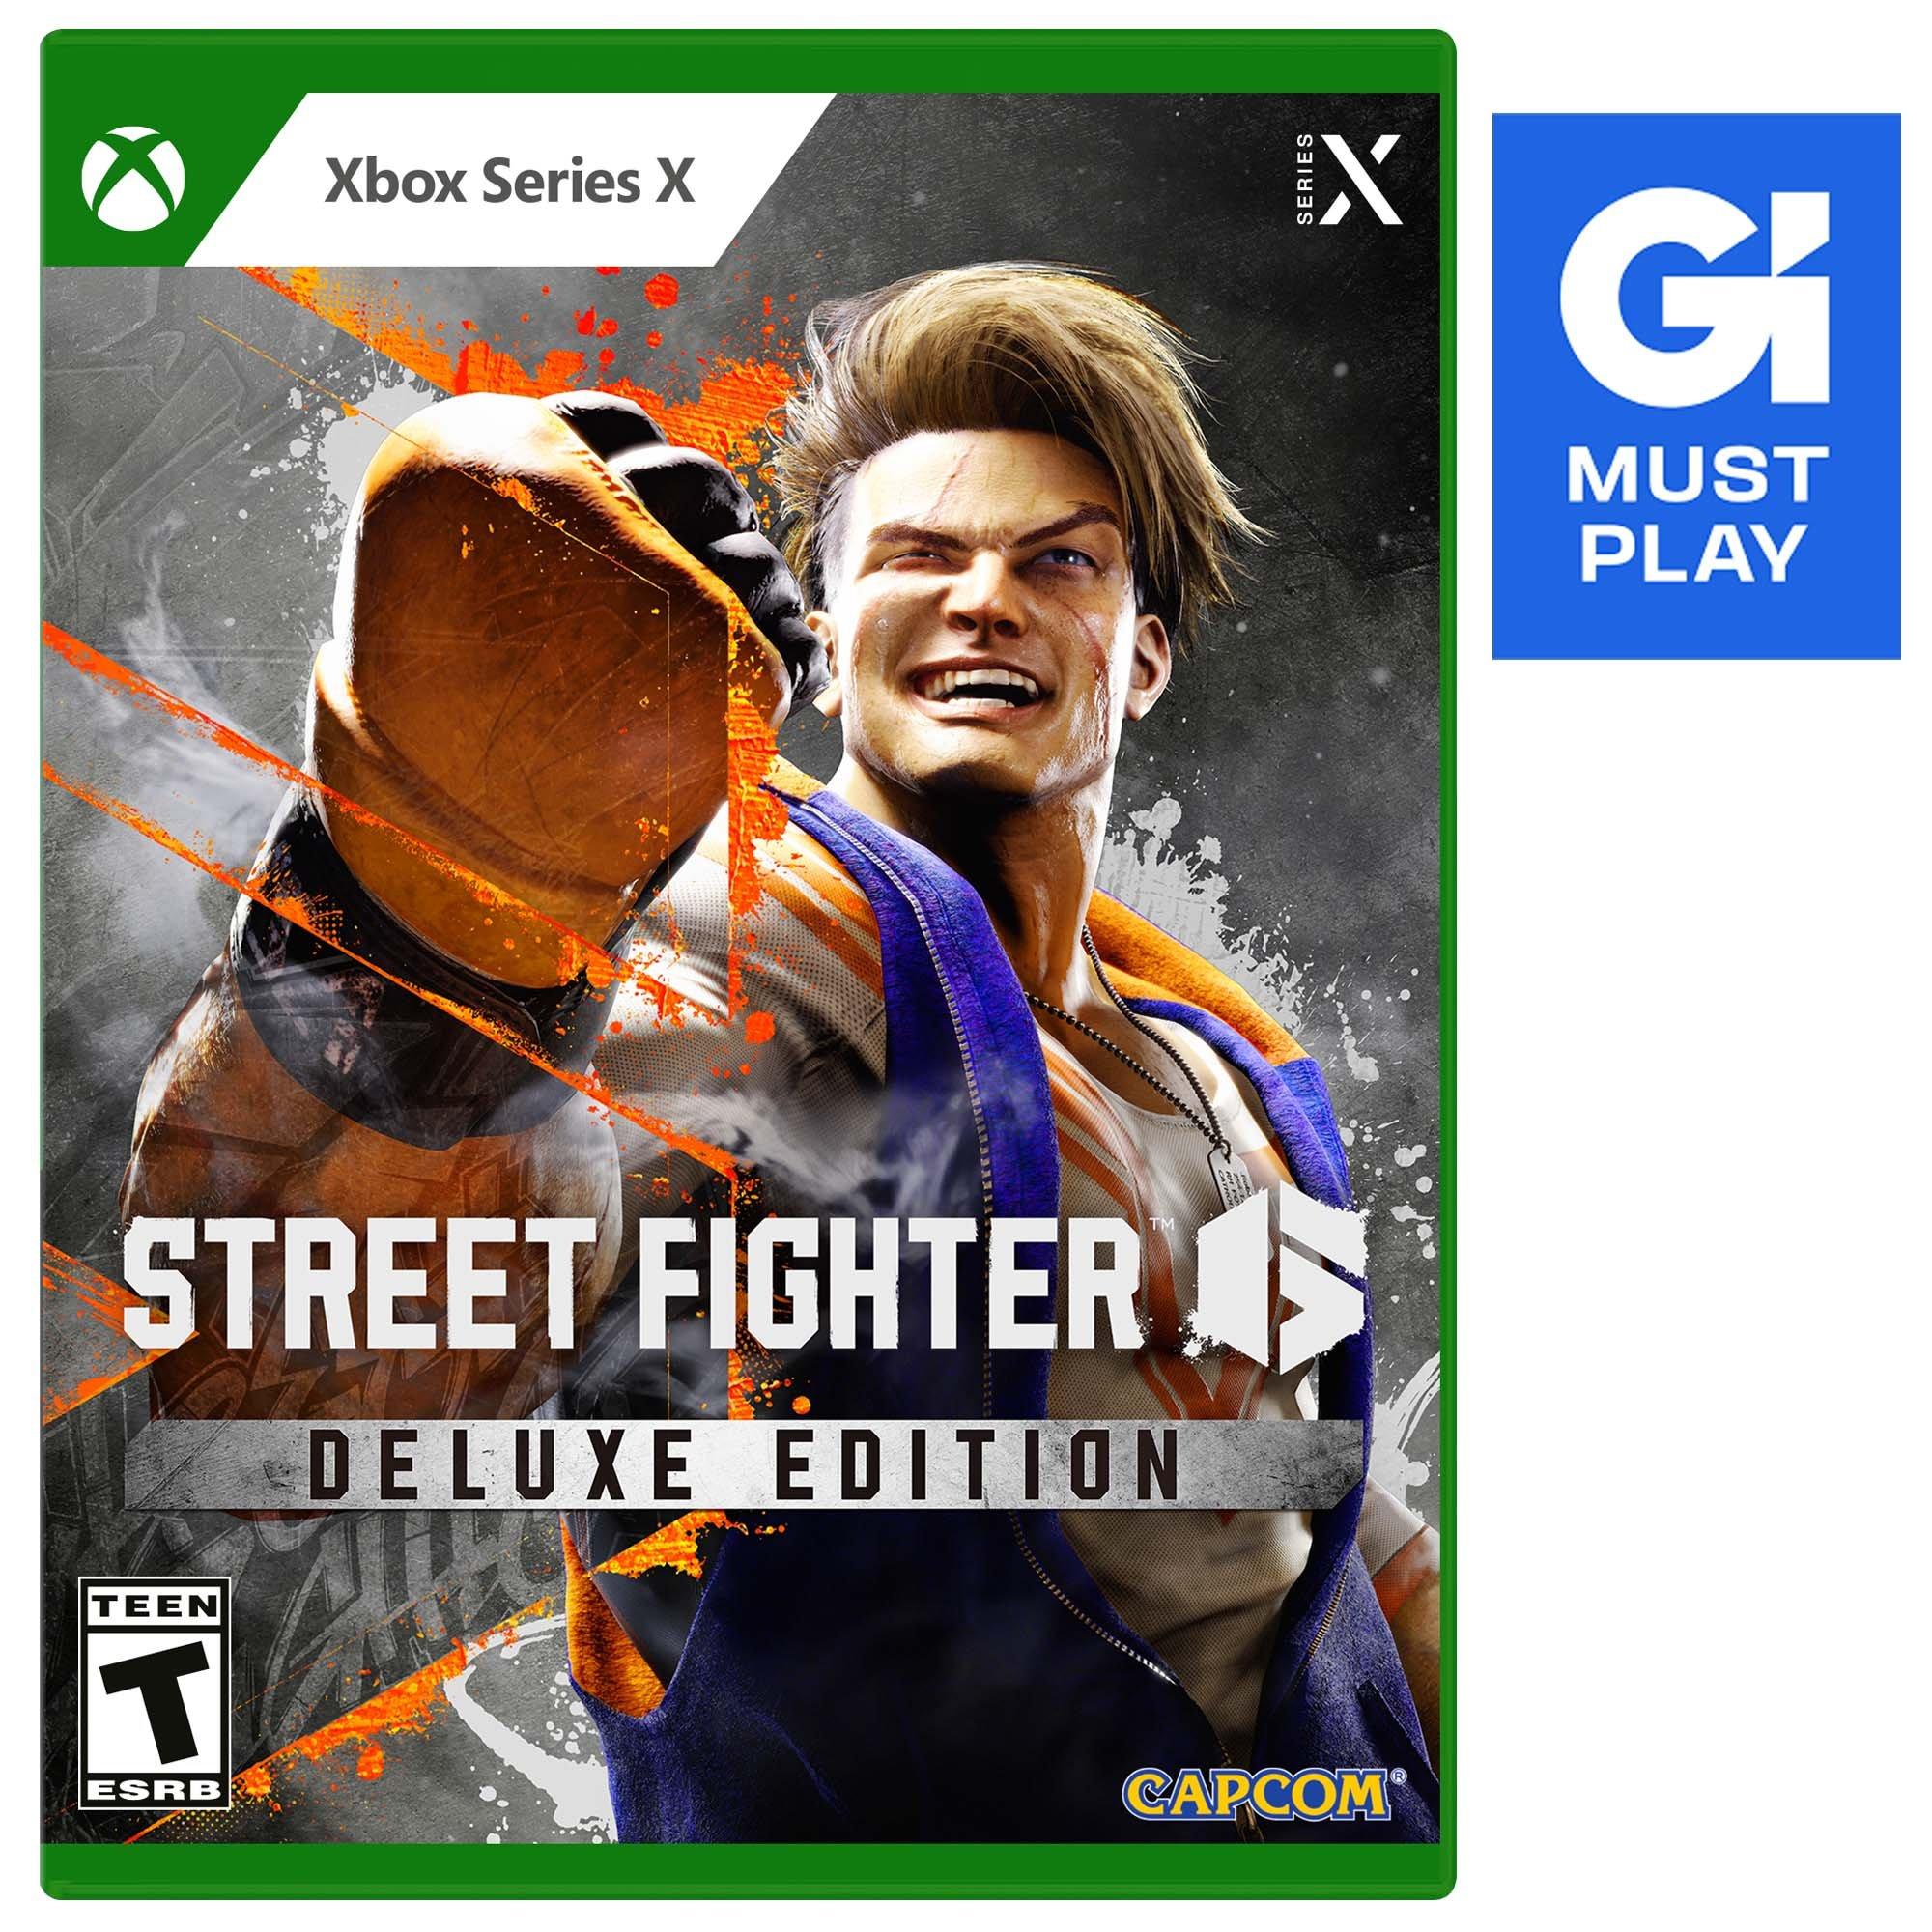  Street Fighter 6 - Ultimate Edition - Xbox Series X